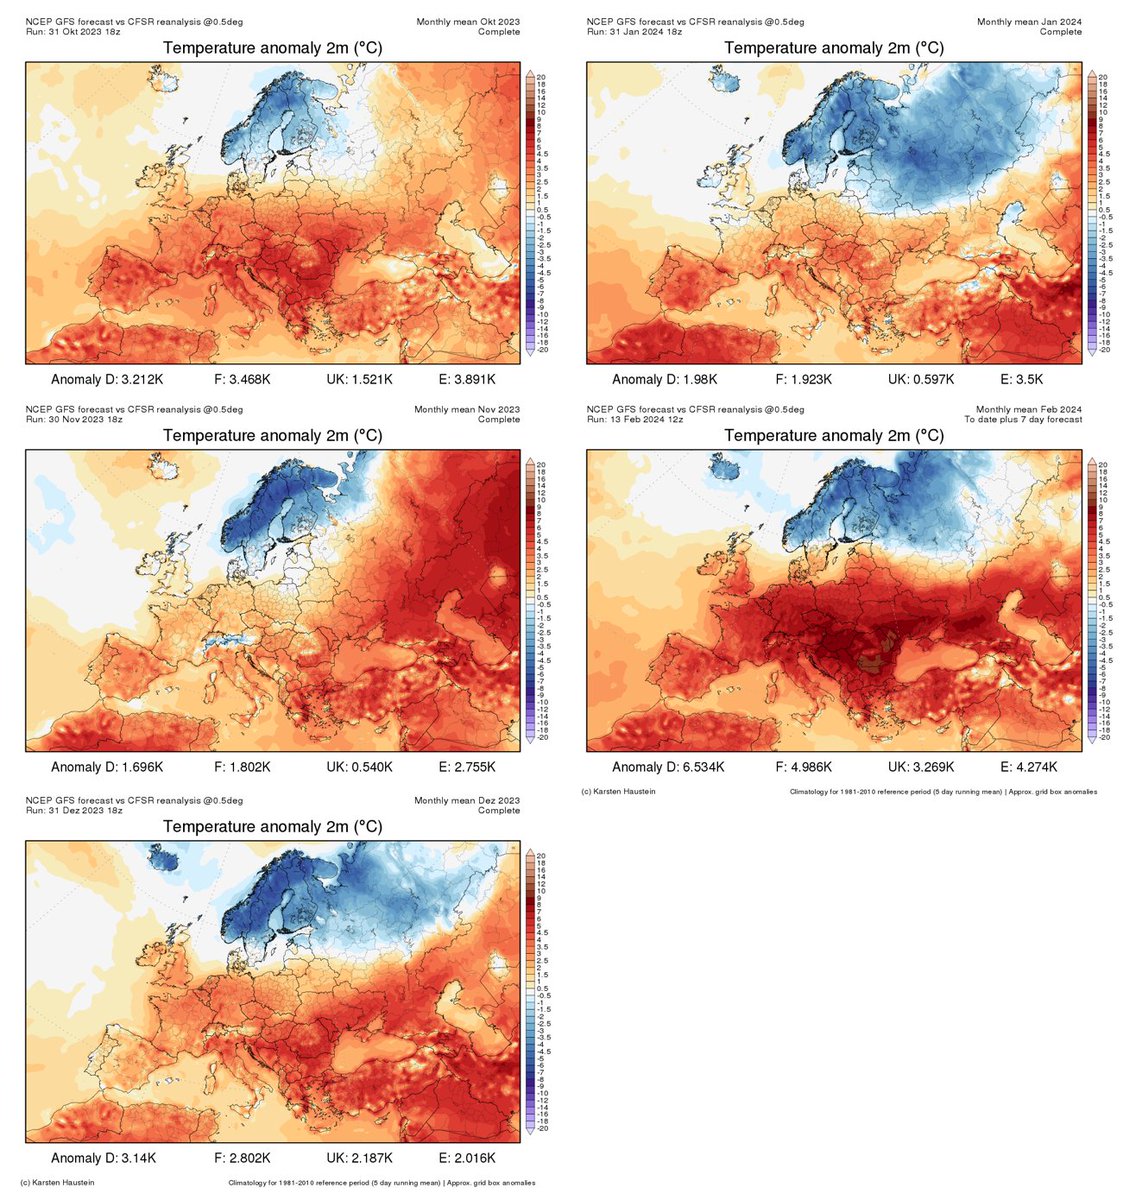 Imagine you live in Scandinavia this winter on an otherwise boiling planet. Extremely wyld and rare persistence in the large scale atmospheric flow. Almost 5 months in and counting ... karstenhaustein.com/climate